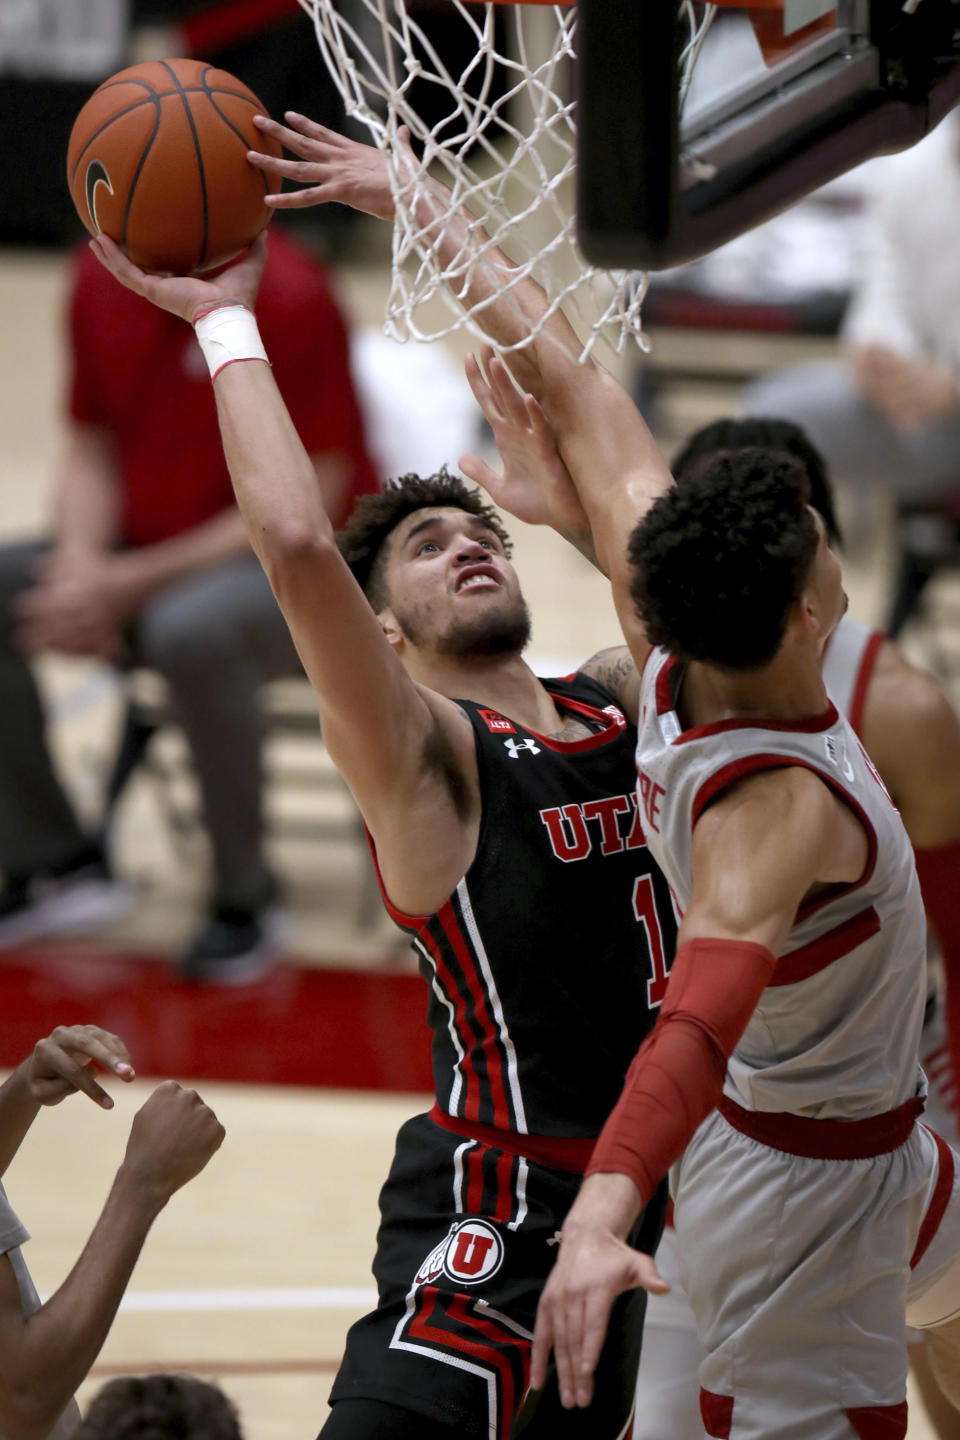 Utah forward Timmy Allen (1) scores against Stanford forward Jaiden Delaire during the first half of an NCAA college basketball game Saturday, Feb. 13, 2021, in Stanford, Calif. (AP Photo/Scot Tucker)